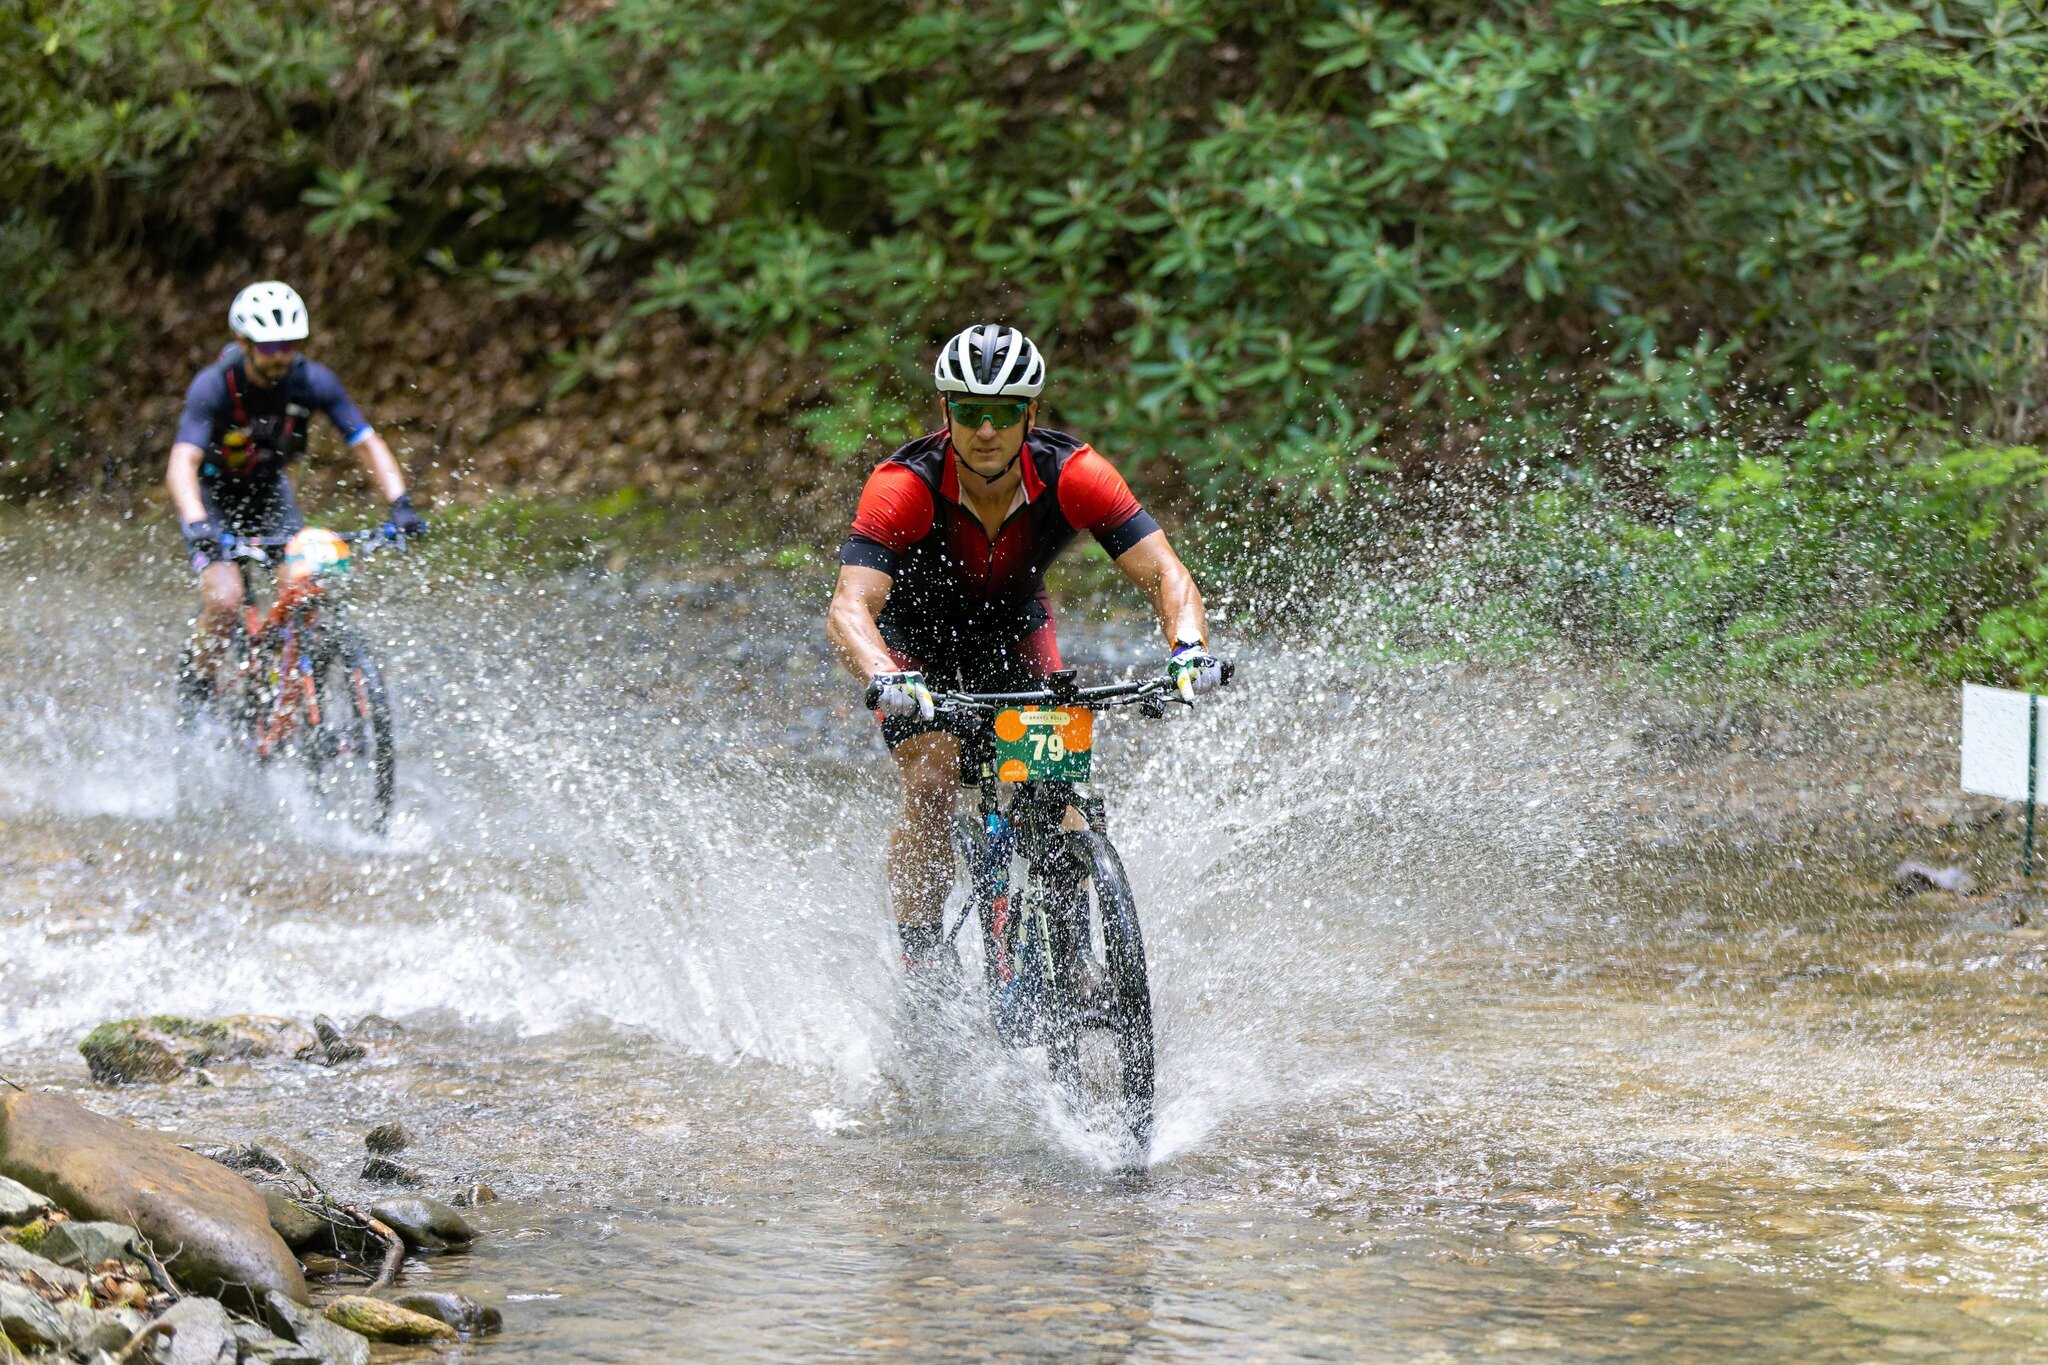 This has got to be an all time best capture of a creek splash. Look at that form! The height! The sheer breadth of it. 

Bravo dear rider, we're absolutely sure you're a pro at rock skipping too!

 #gravelroll #gravelride #gravelrace #gravelcycling #